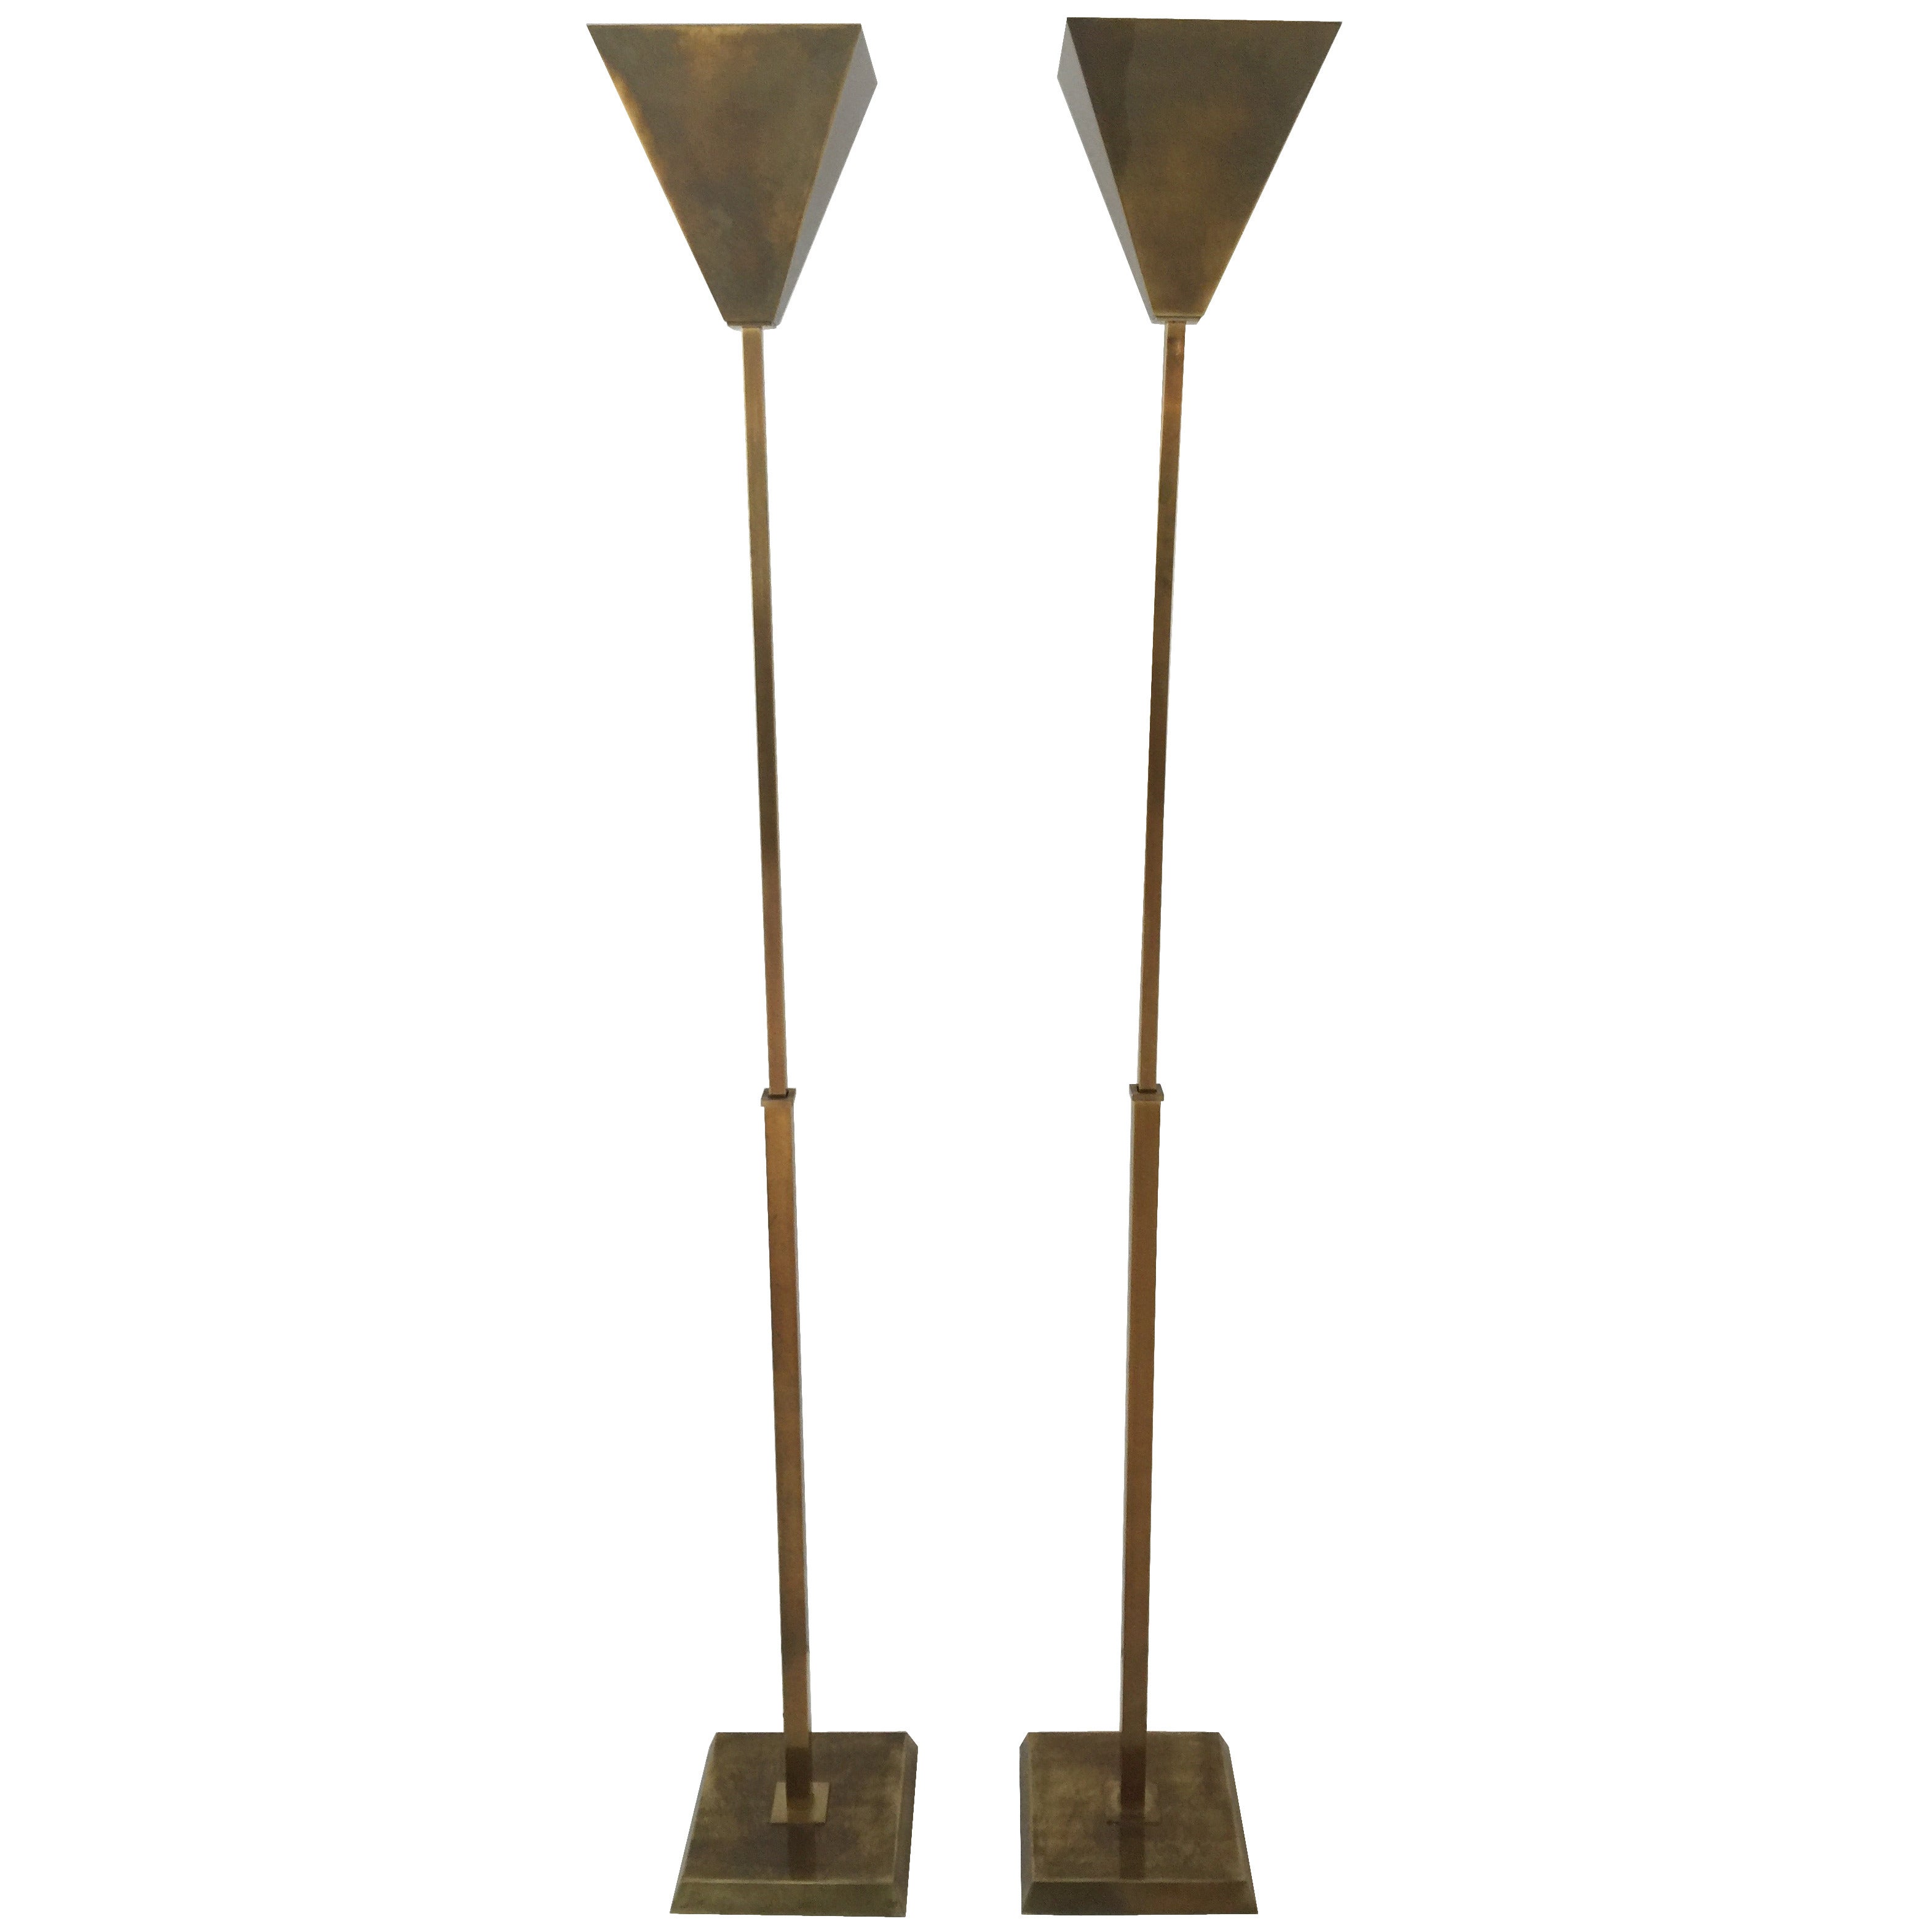 Pair of Chapman Brass Torchieres with Inverted Pyramid Diffusers